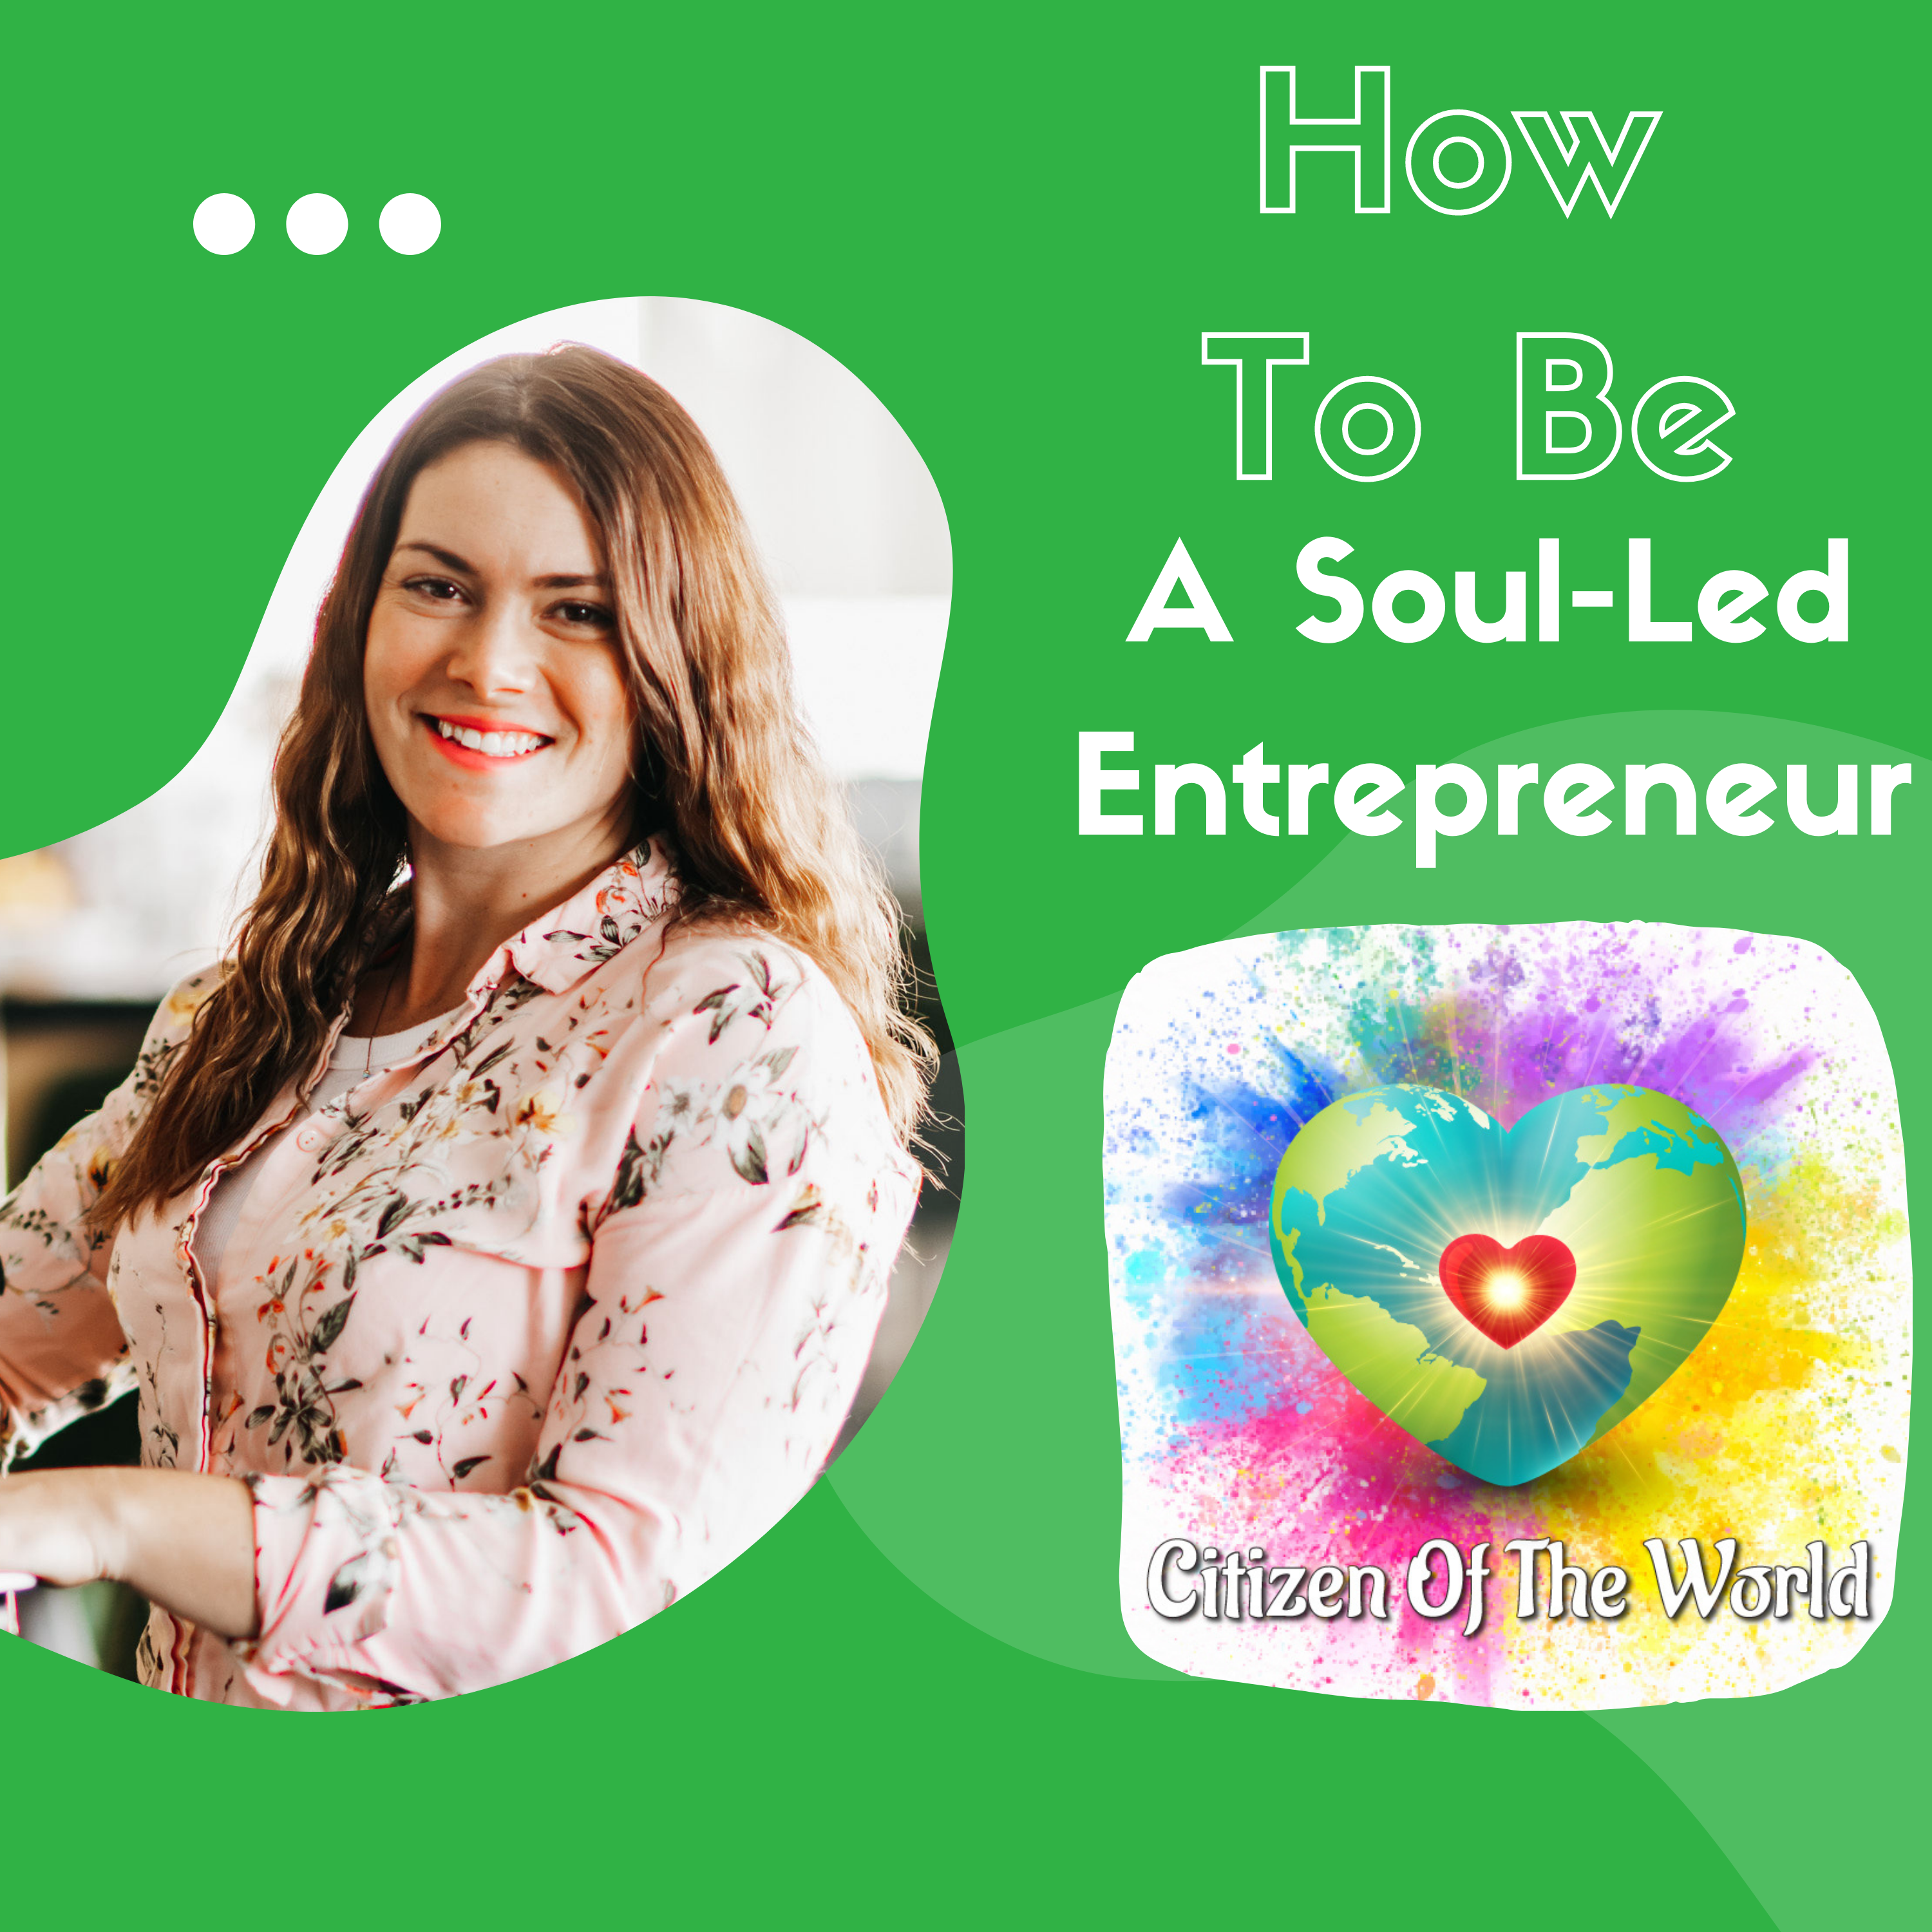 How to become a spiritual entrepreneur. Discover how to run a soul-led business!